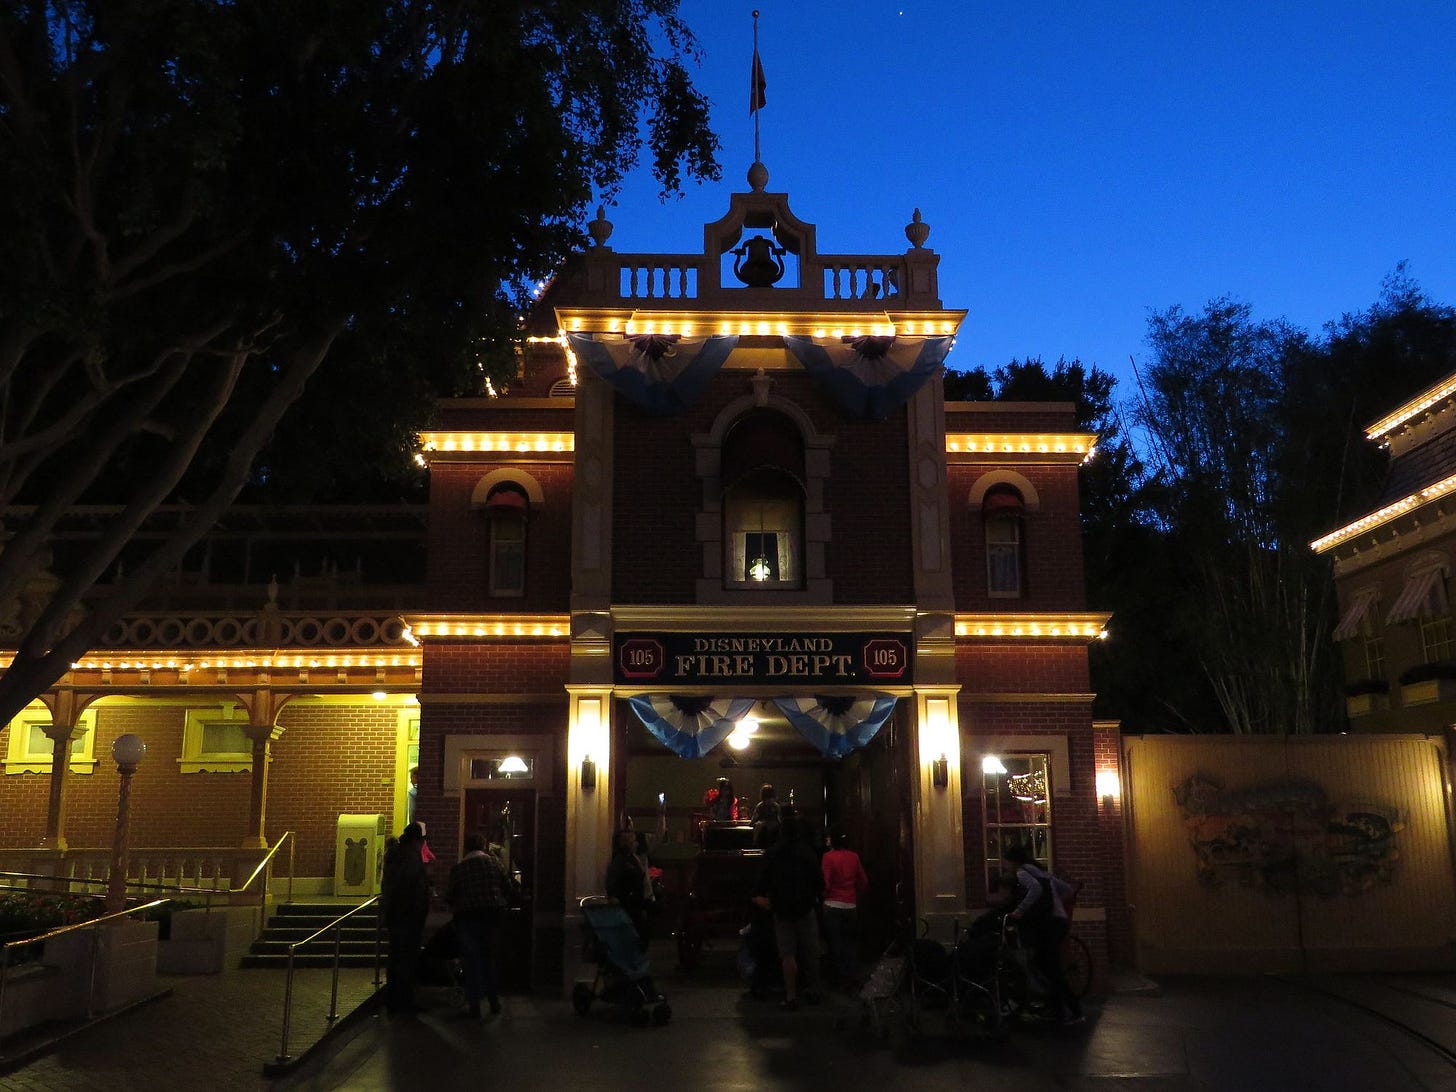 Obscure facts about Disneyland Resort to annoy your family with next time you visit